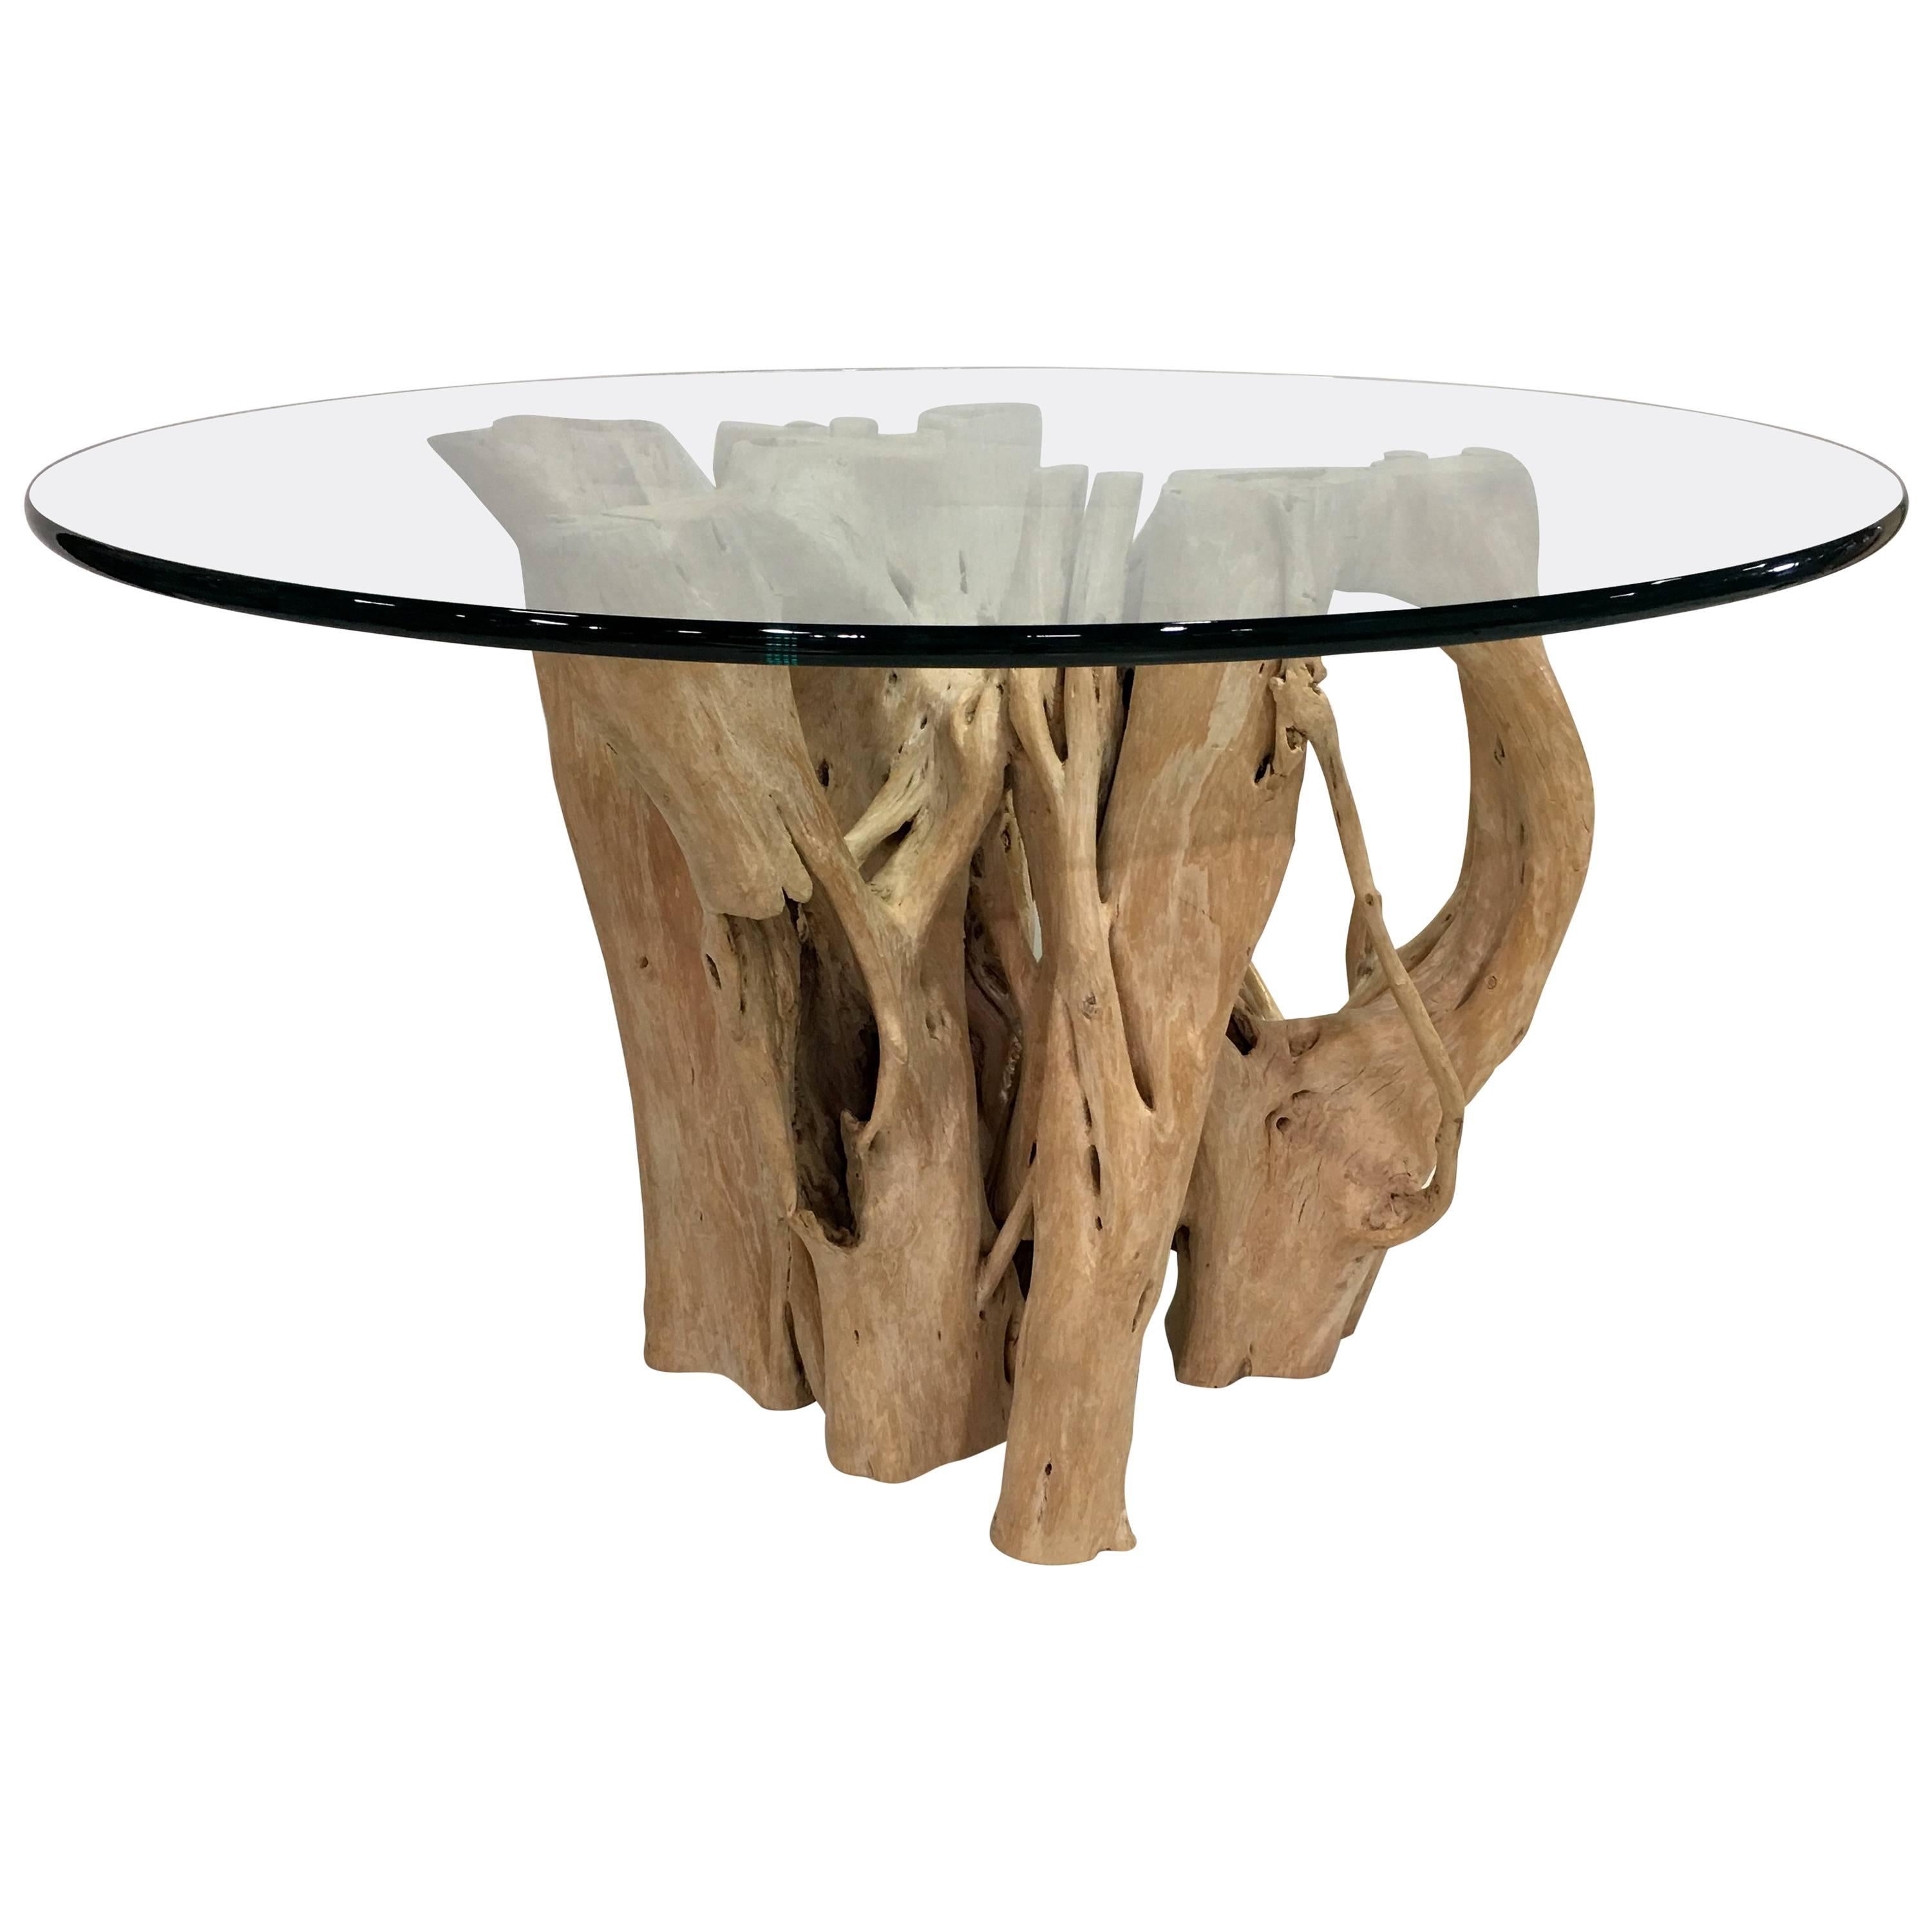 Cypress Tree Trunk Dining Table by Michael Taylor